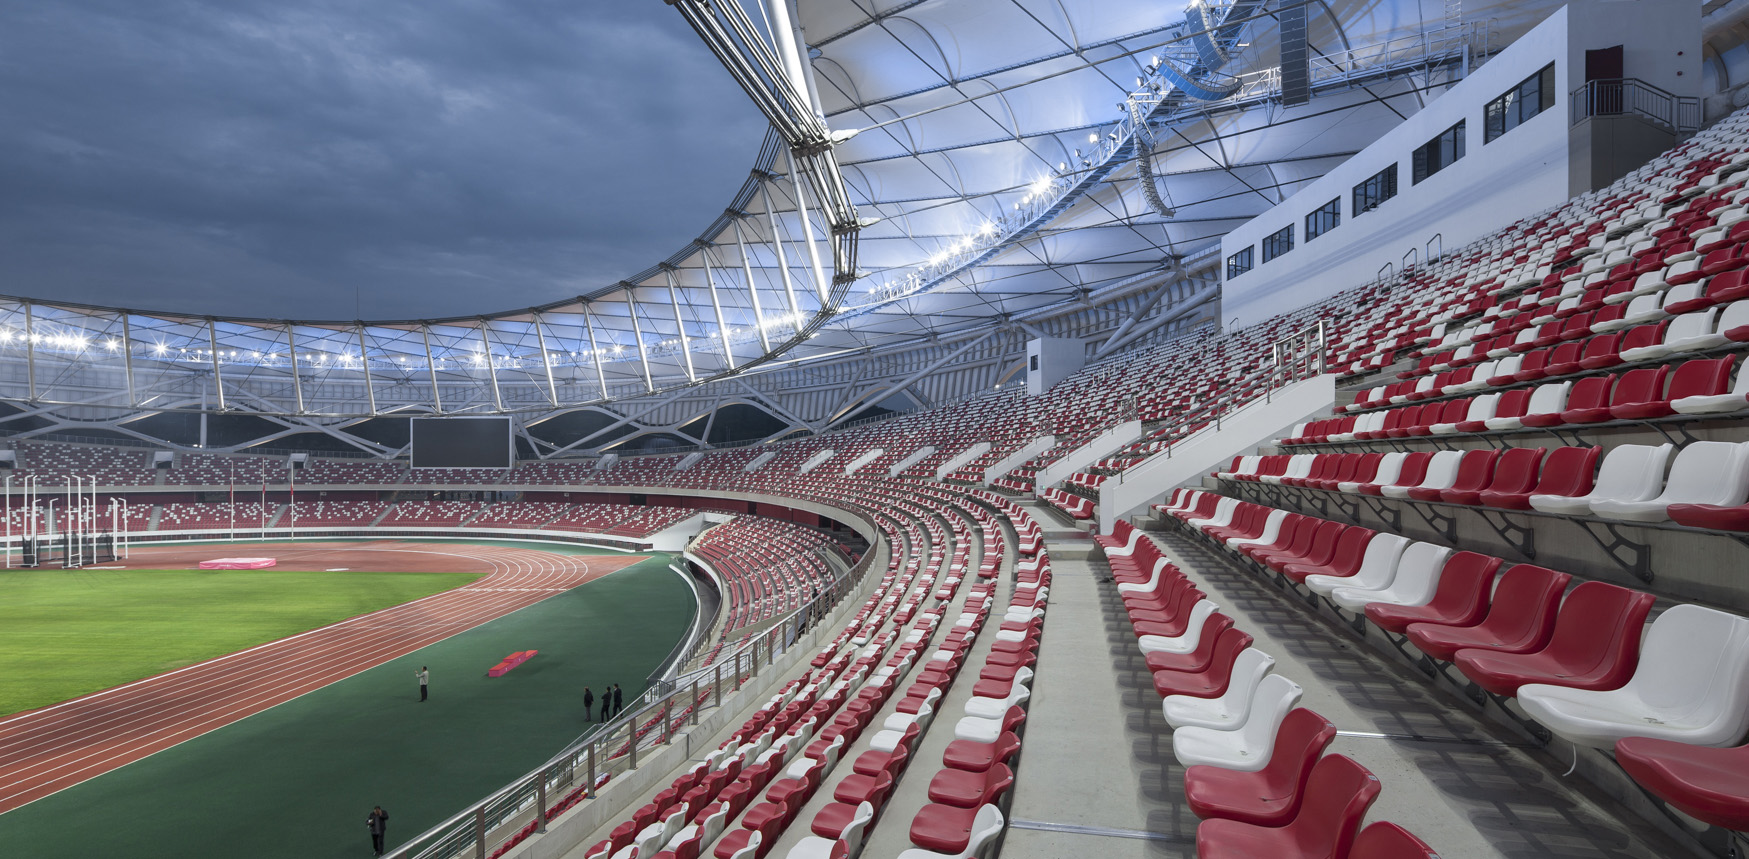 The Future of Sports: Why Are Temporary Sports Facilities Taking Over?